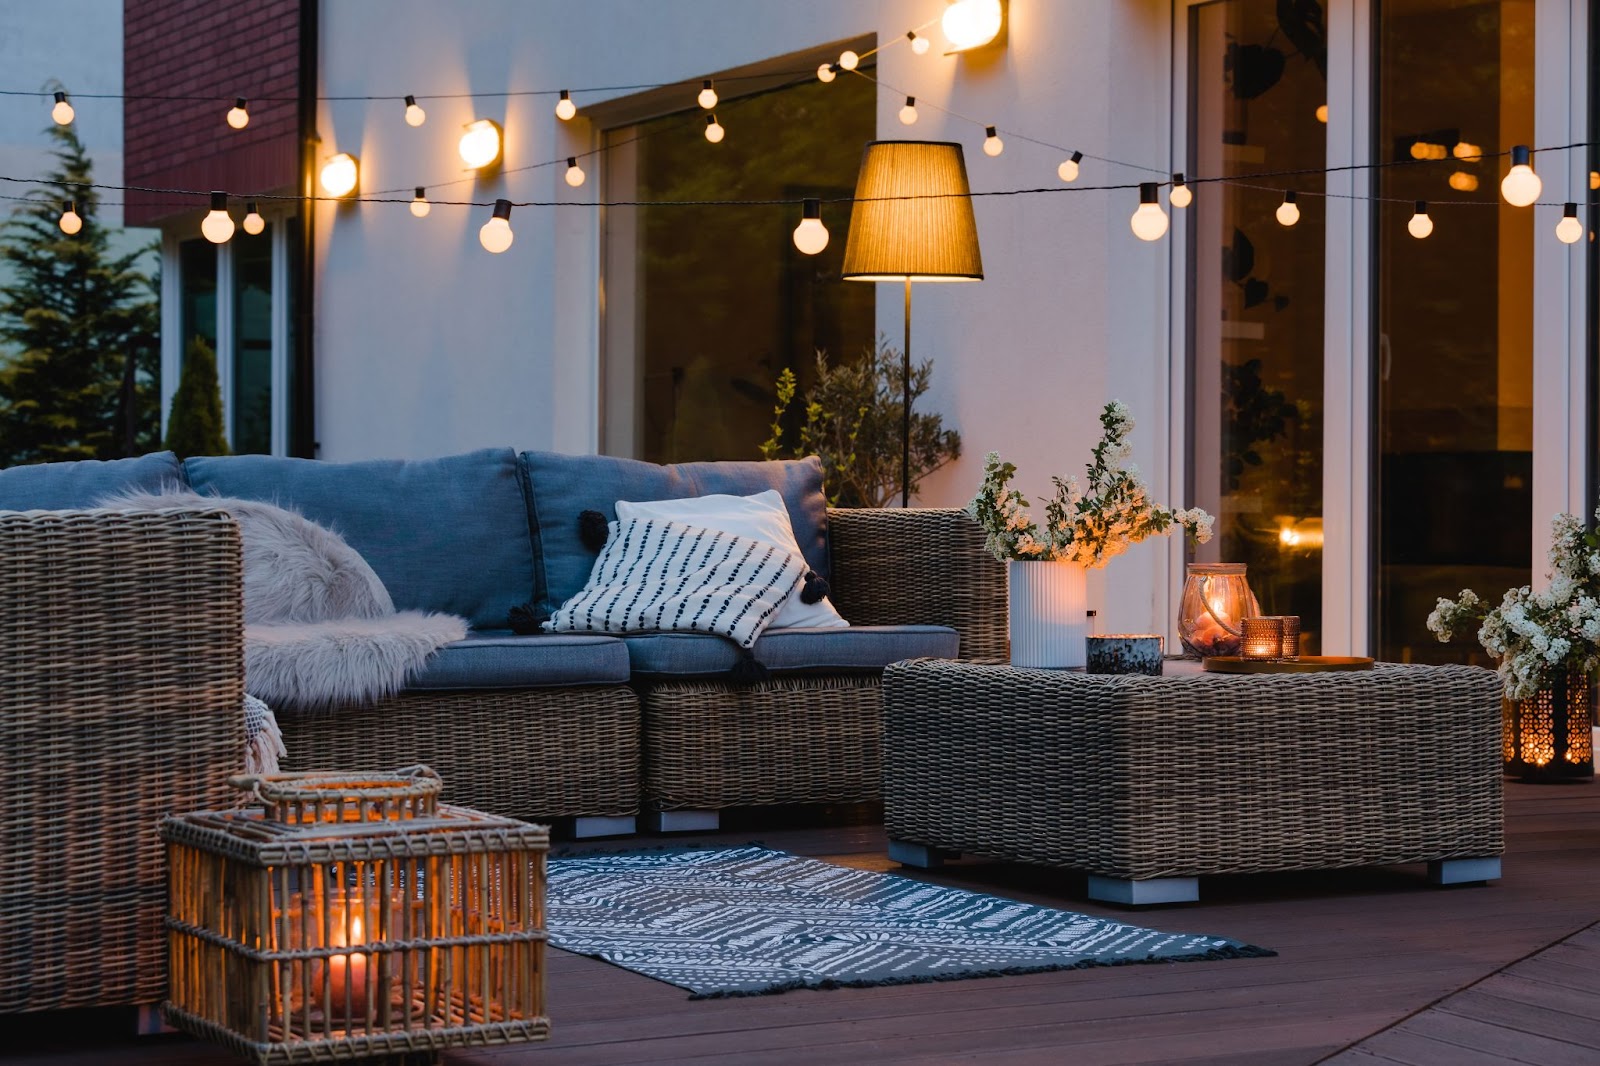 These outdoor deck lighting ideas will help you enjoy your deck all autumn long, even as the days get shorter and the nights get crisp.